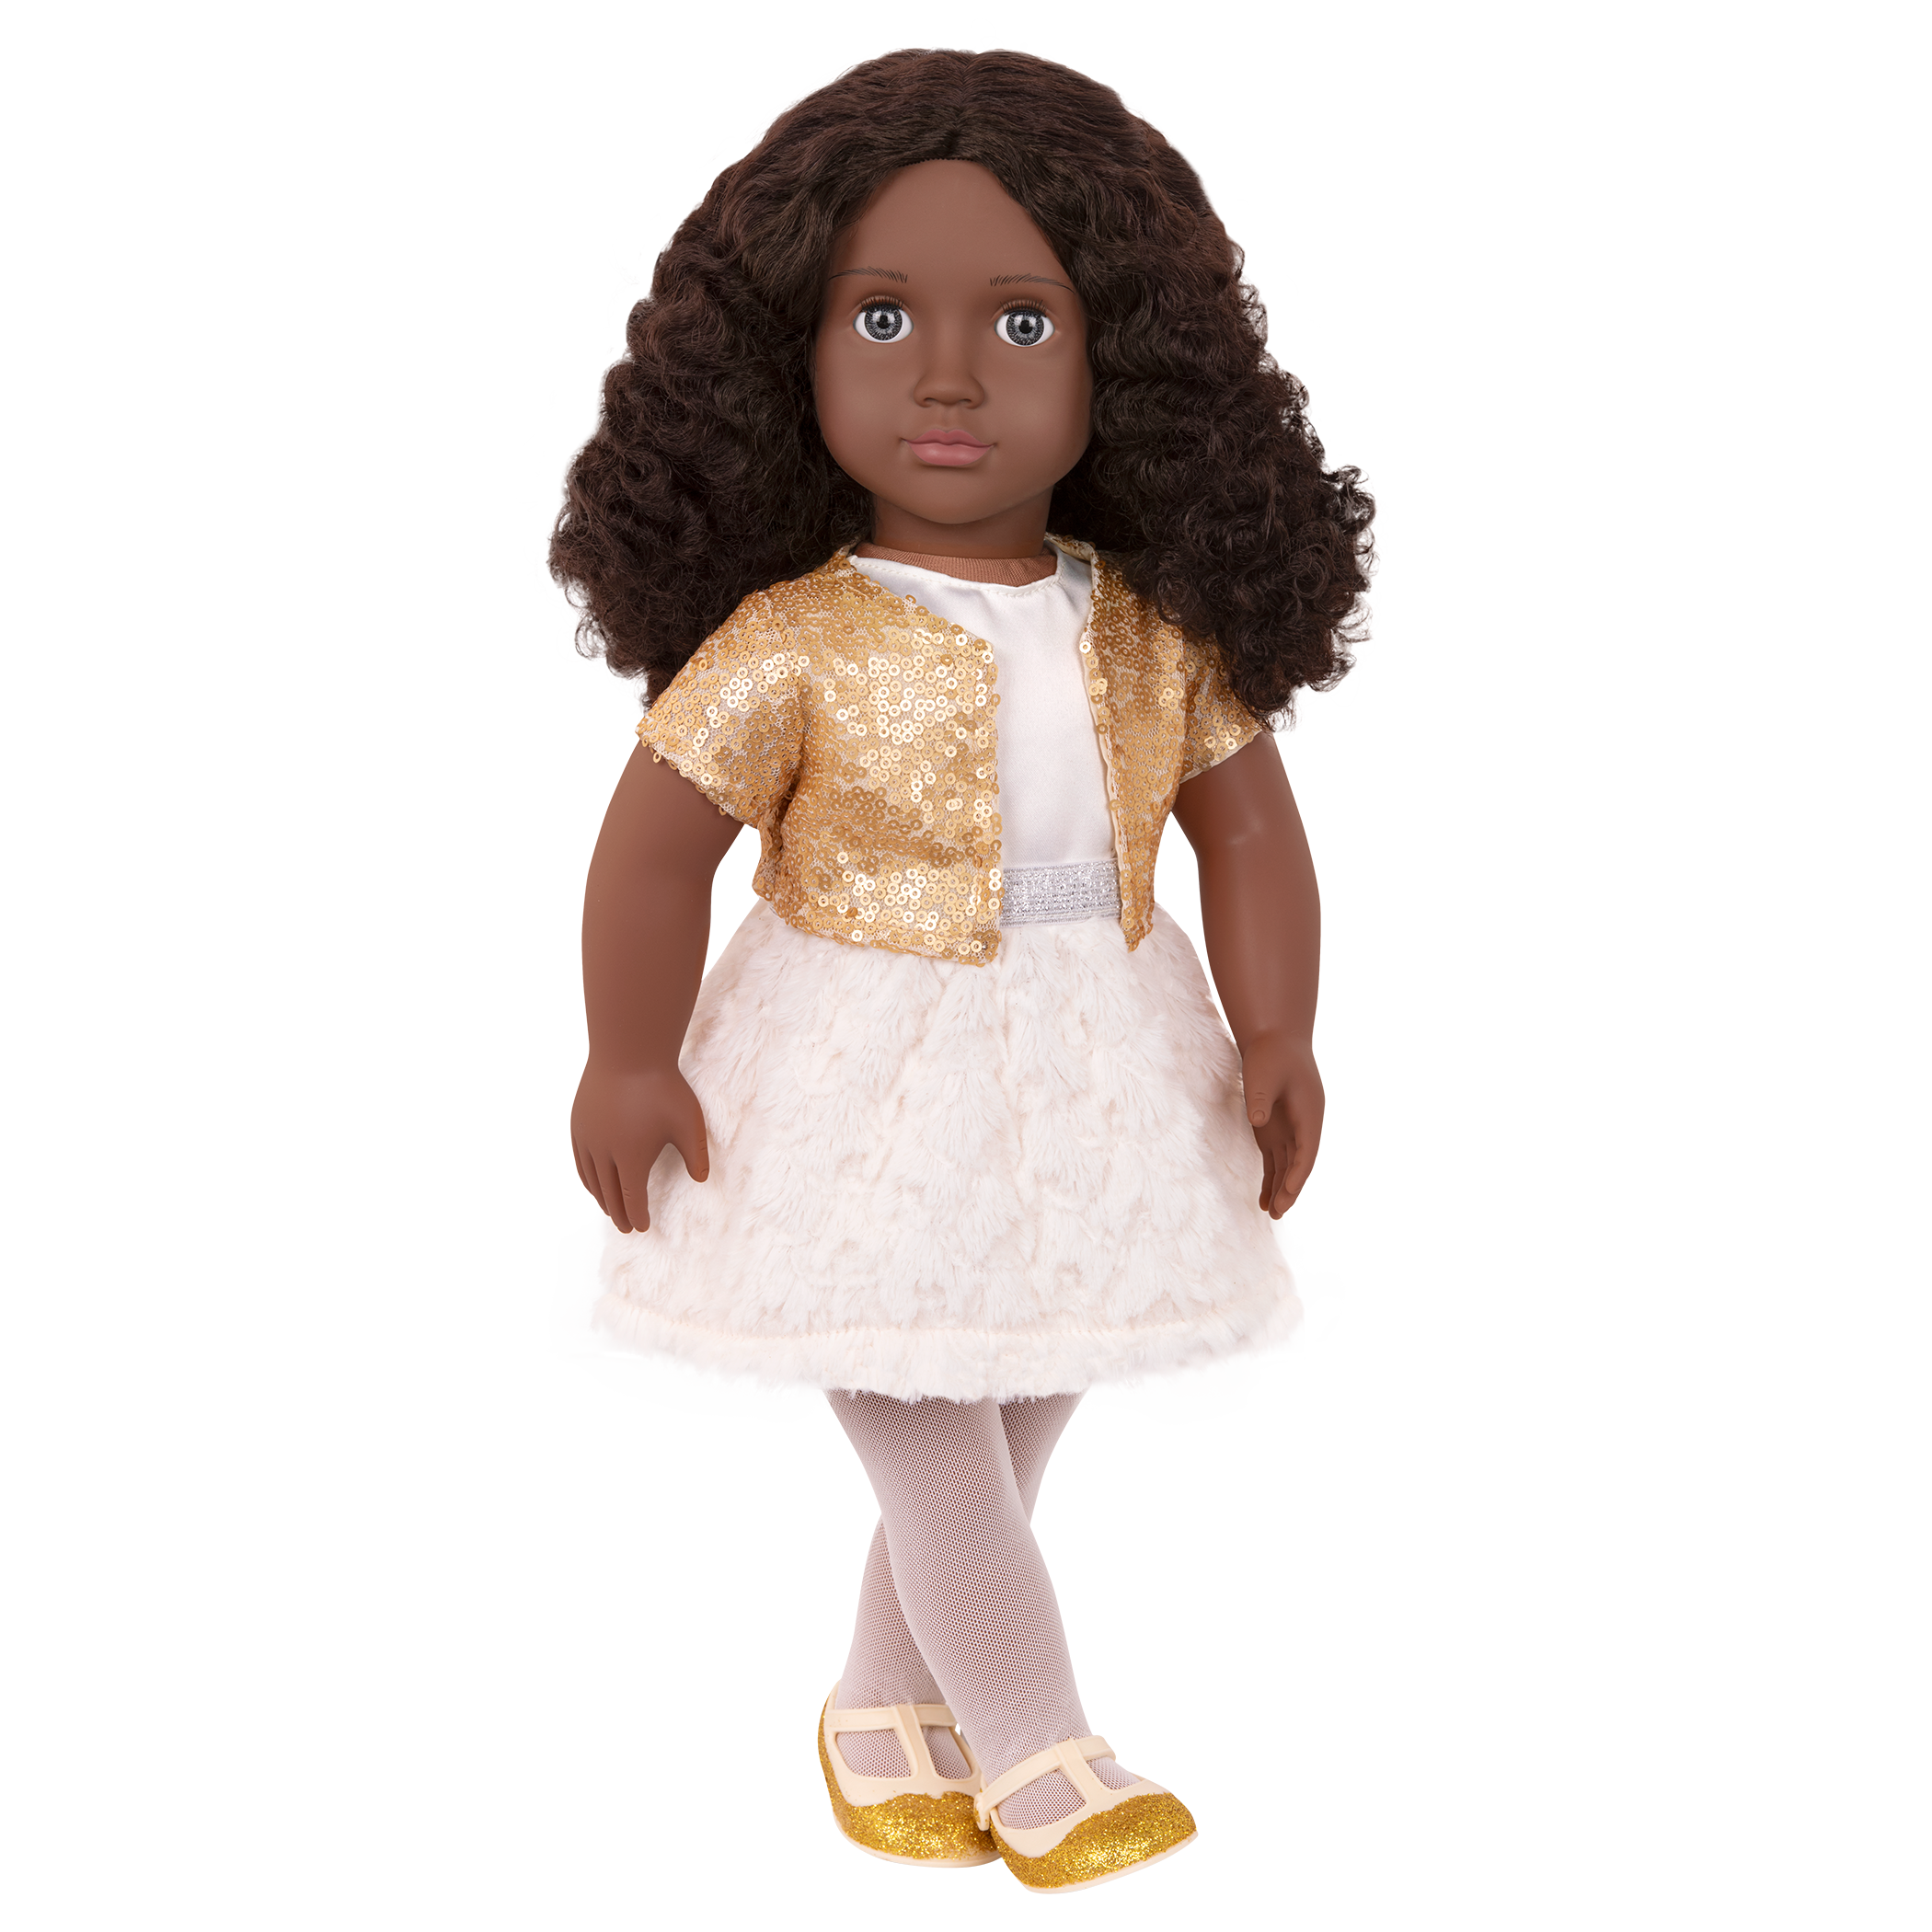 18-inch holiday doll with brown hair and gray eyes